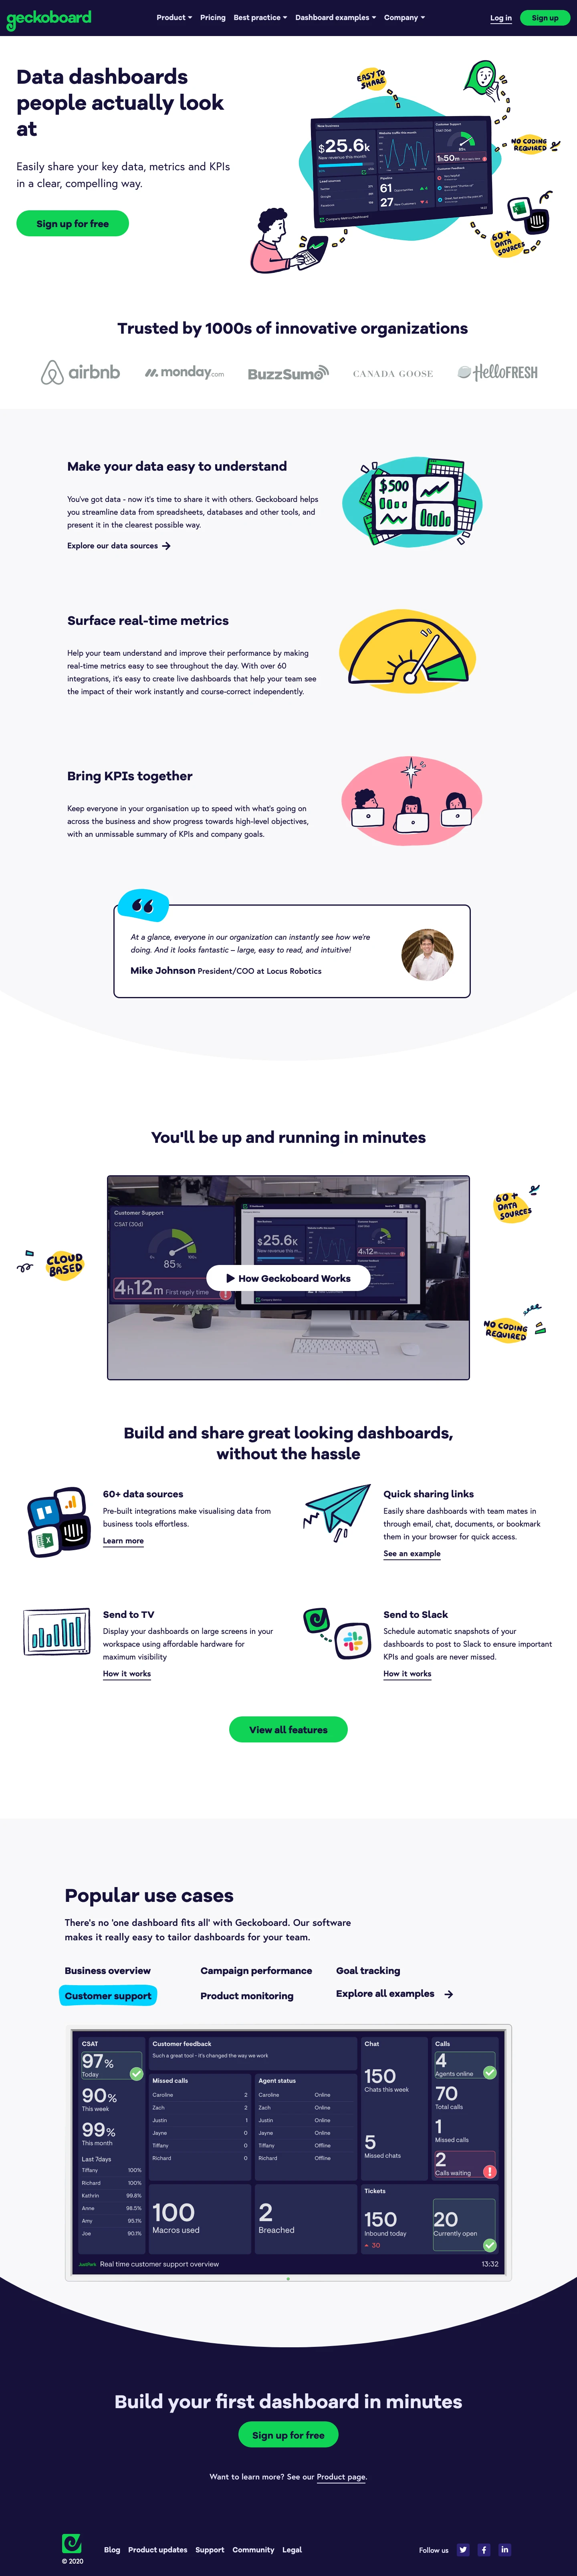 Geckoboard Landing Page Example: Data dashboards people actually look at. Easily share your key data, metrics and KPIs in a clear, compelling way.